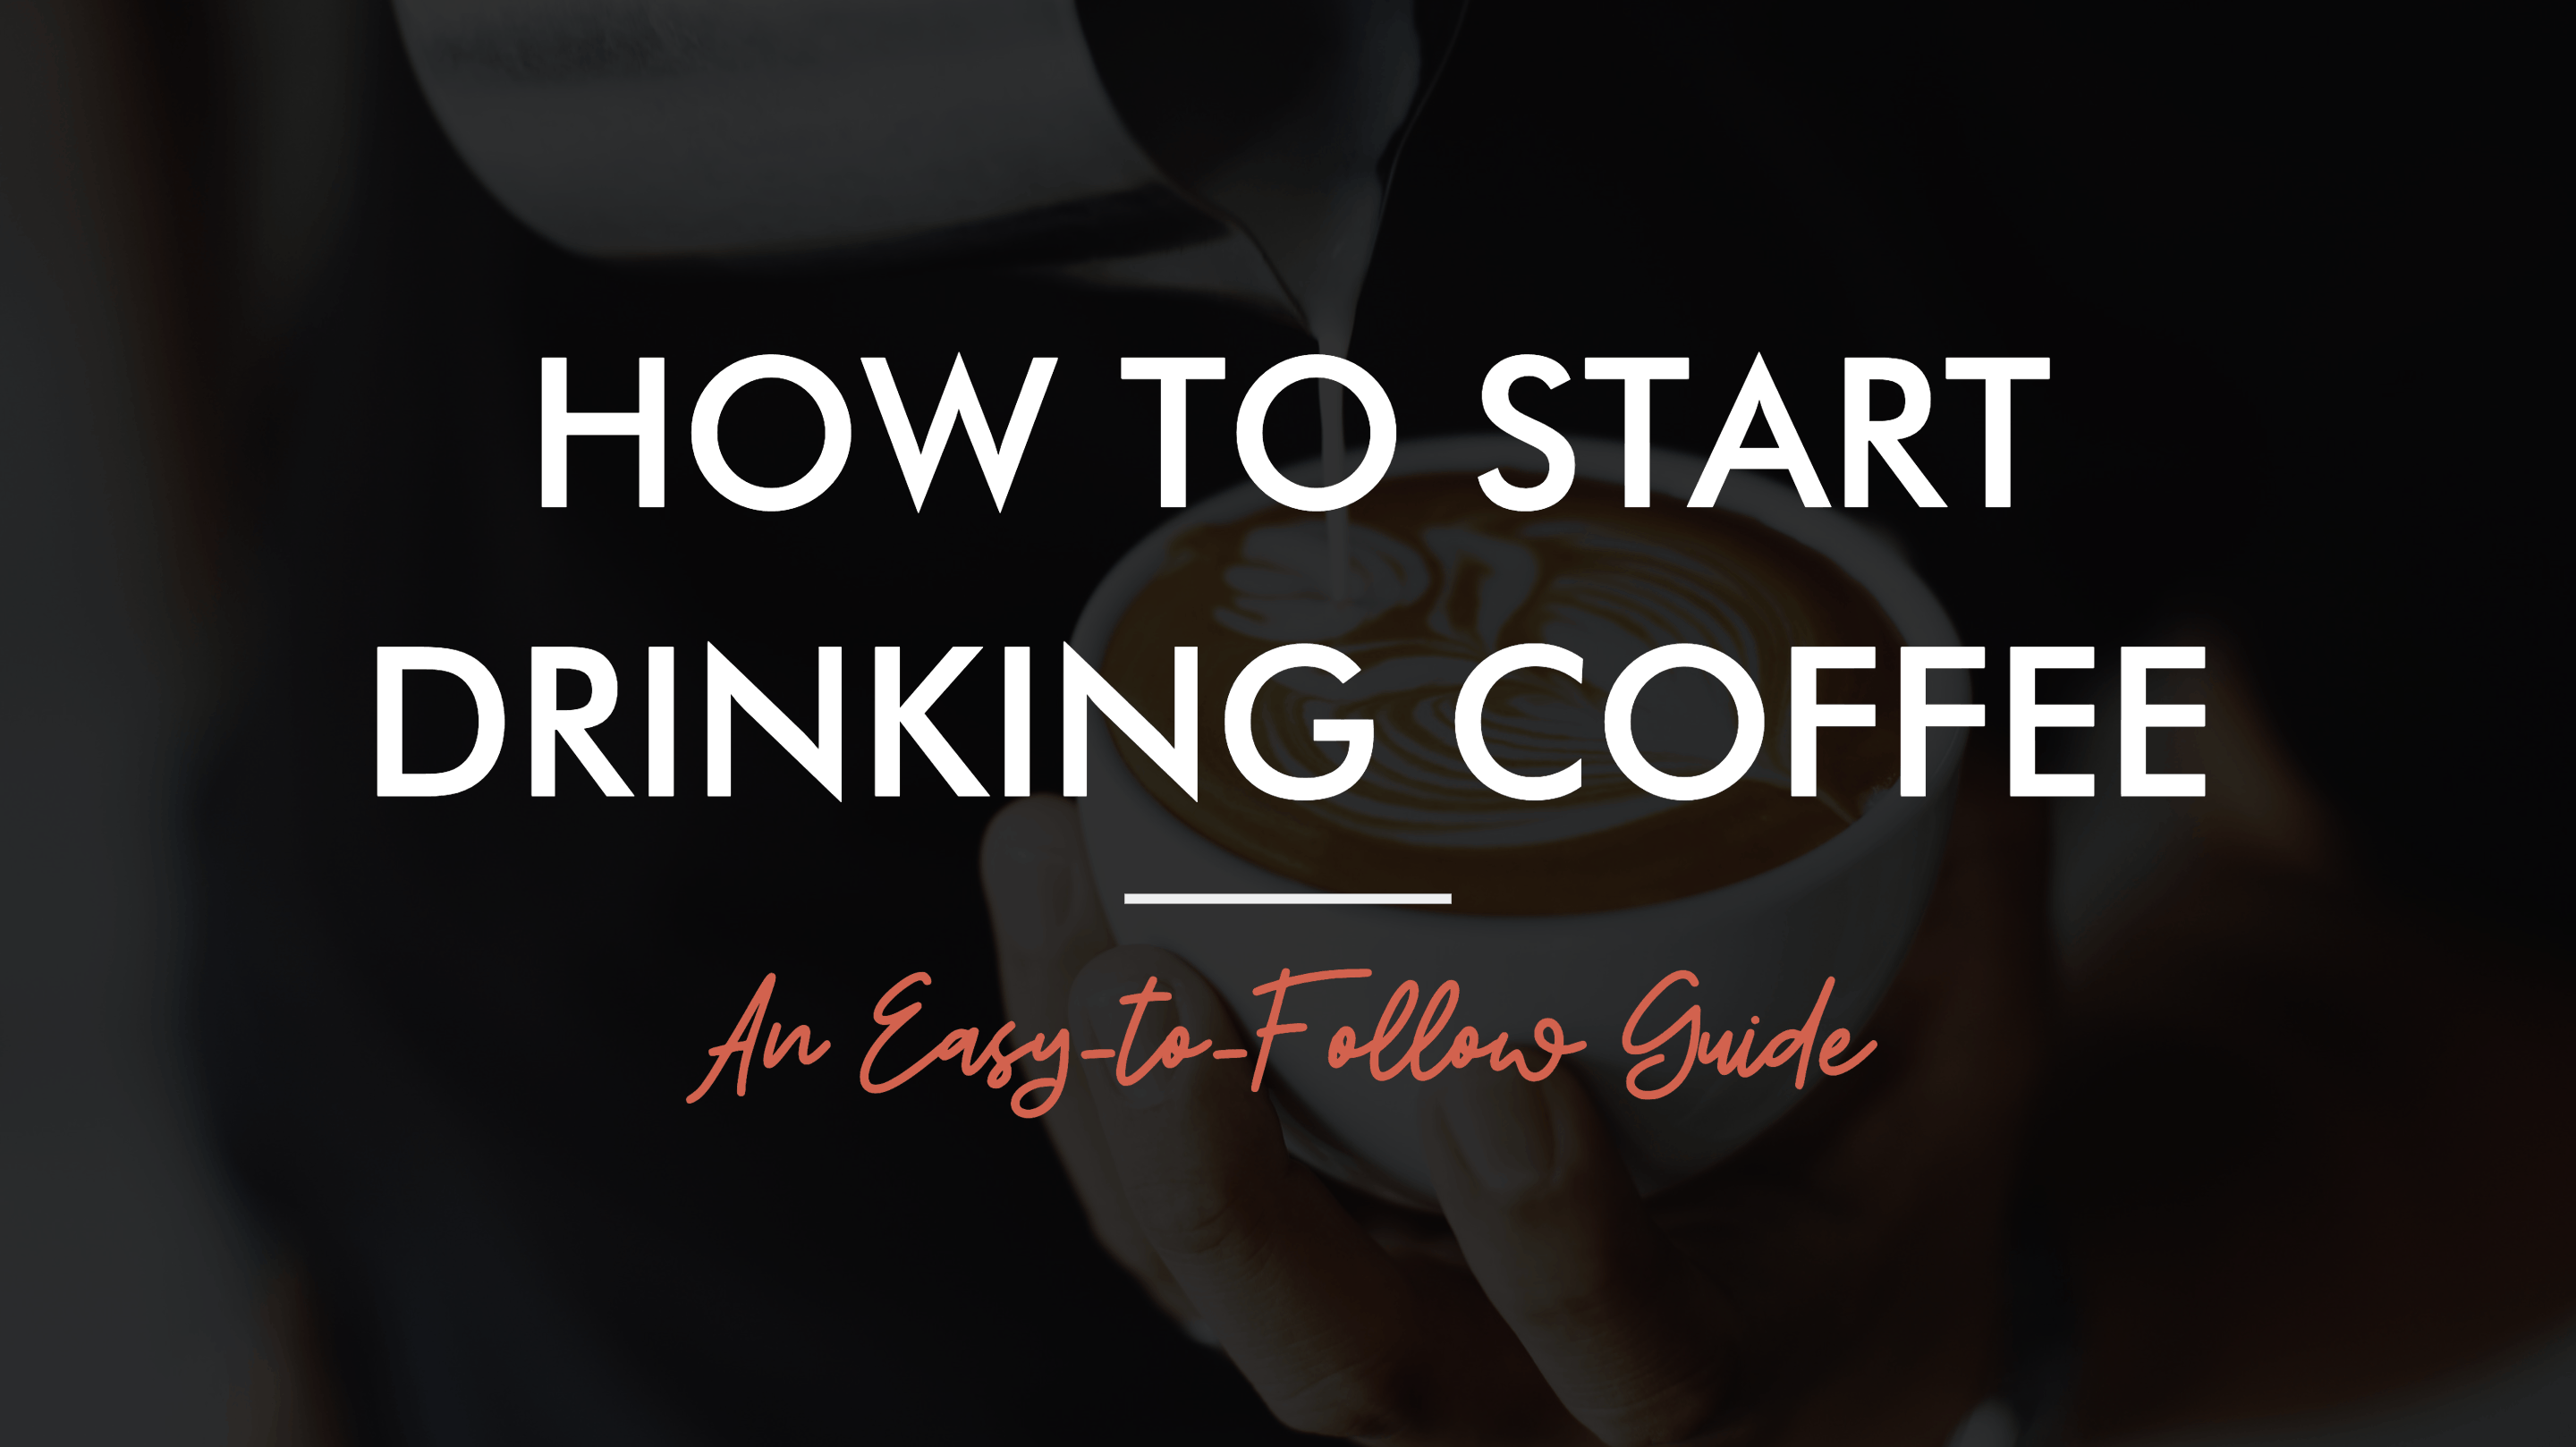 How To Start Drinking Coffee